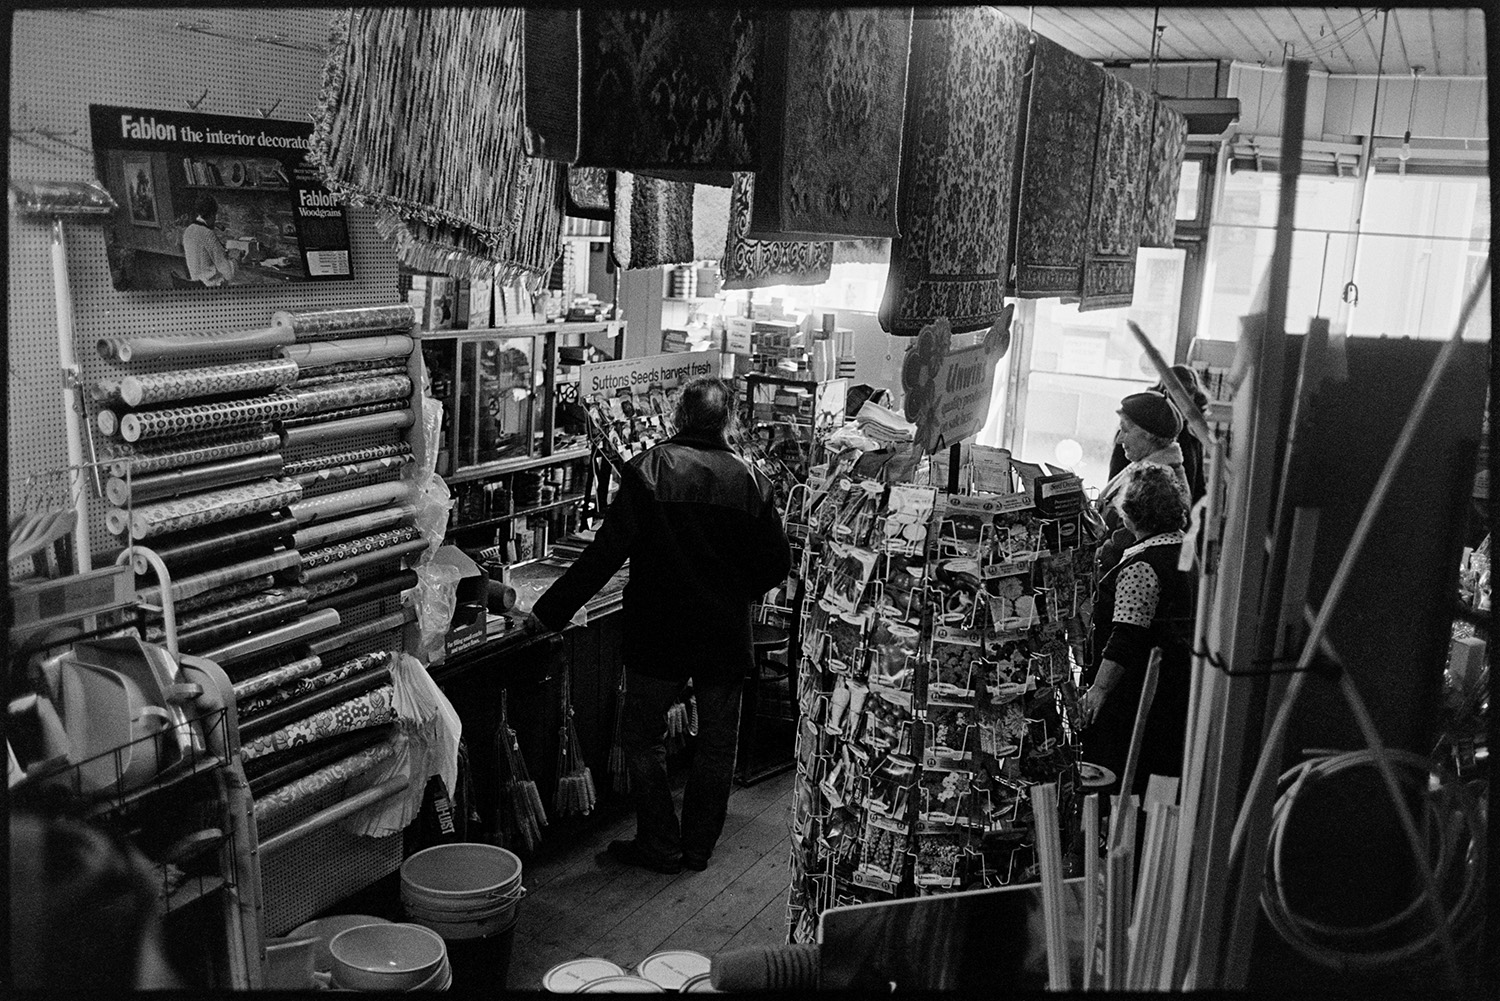 Interior of hardware store with proprietors and customers. 
[Customers queuing at the shop counter in Ellacotts hardware store in Market Street. Hatherleigh. Various goods are on display, including packets of seeds, rugs, buckets and rolls of wallpaper.]